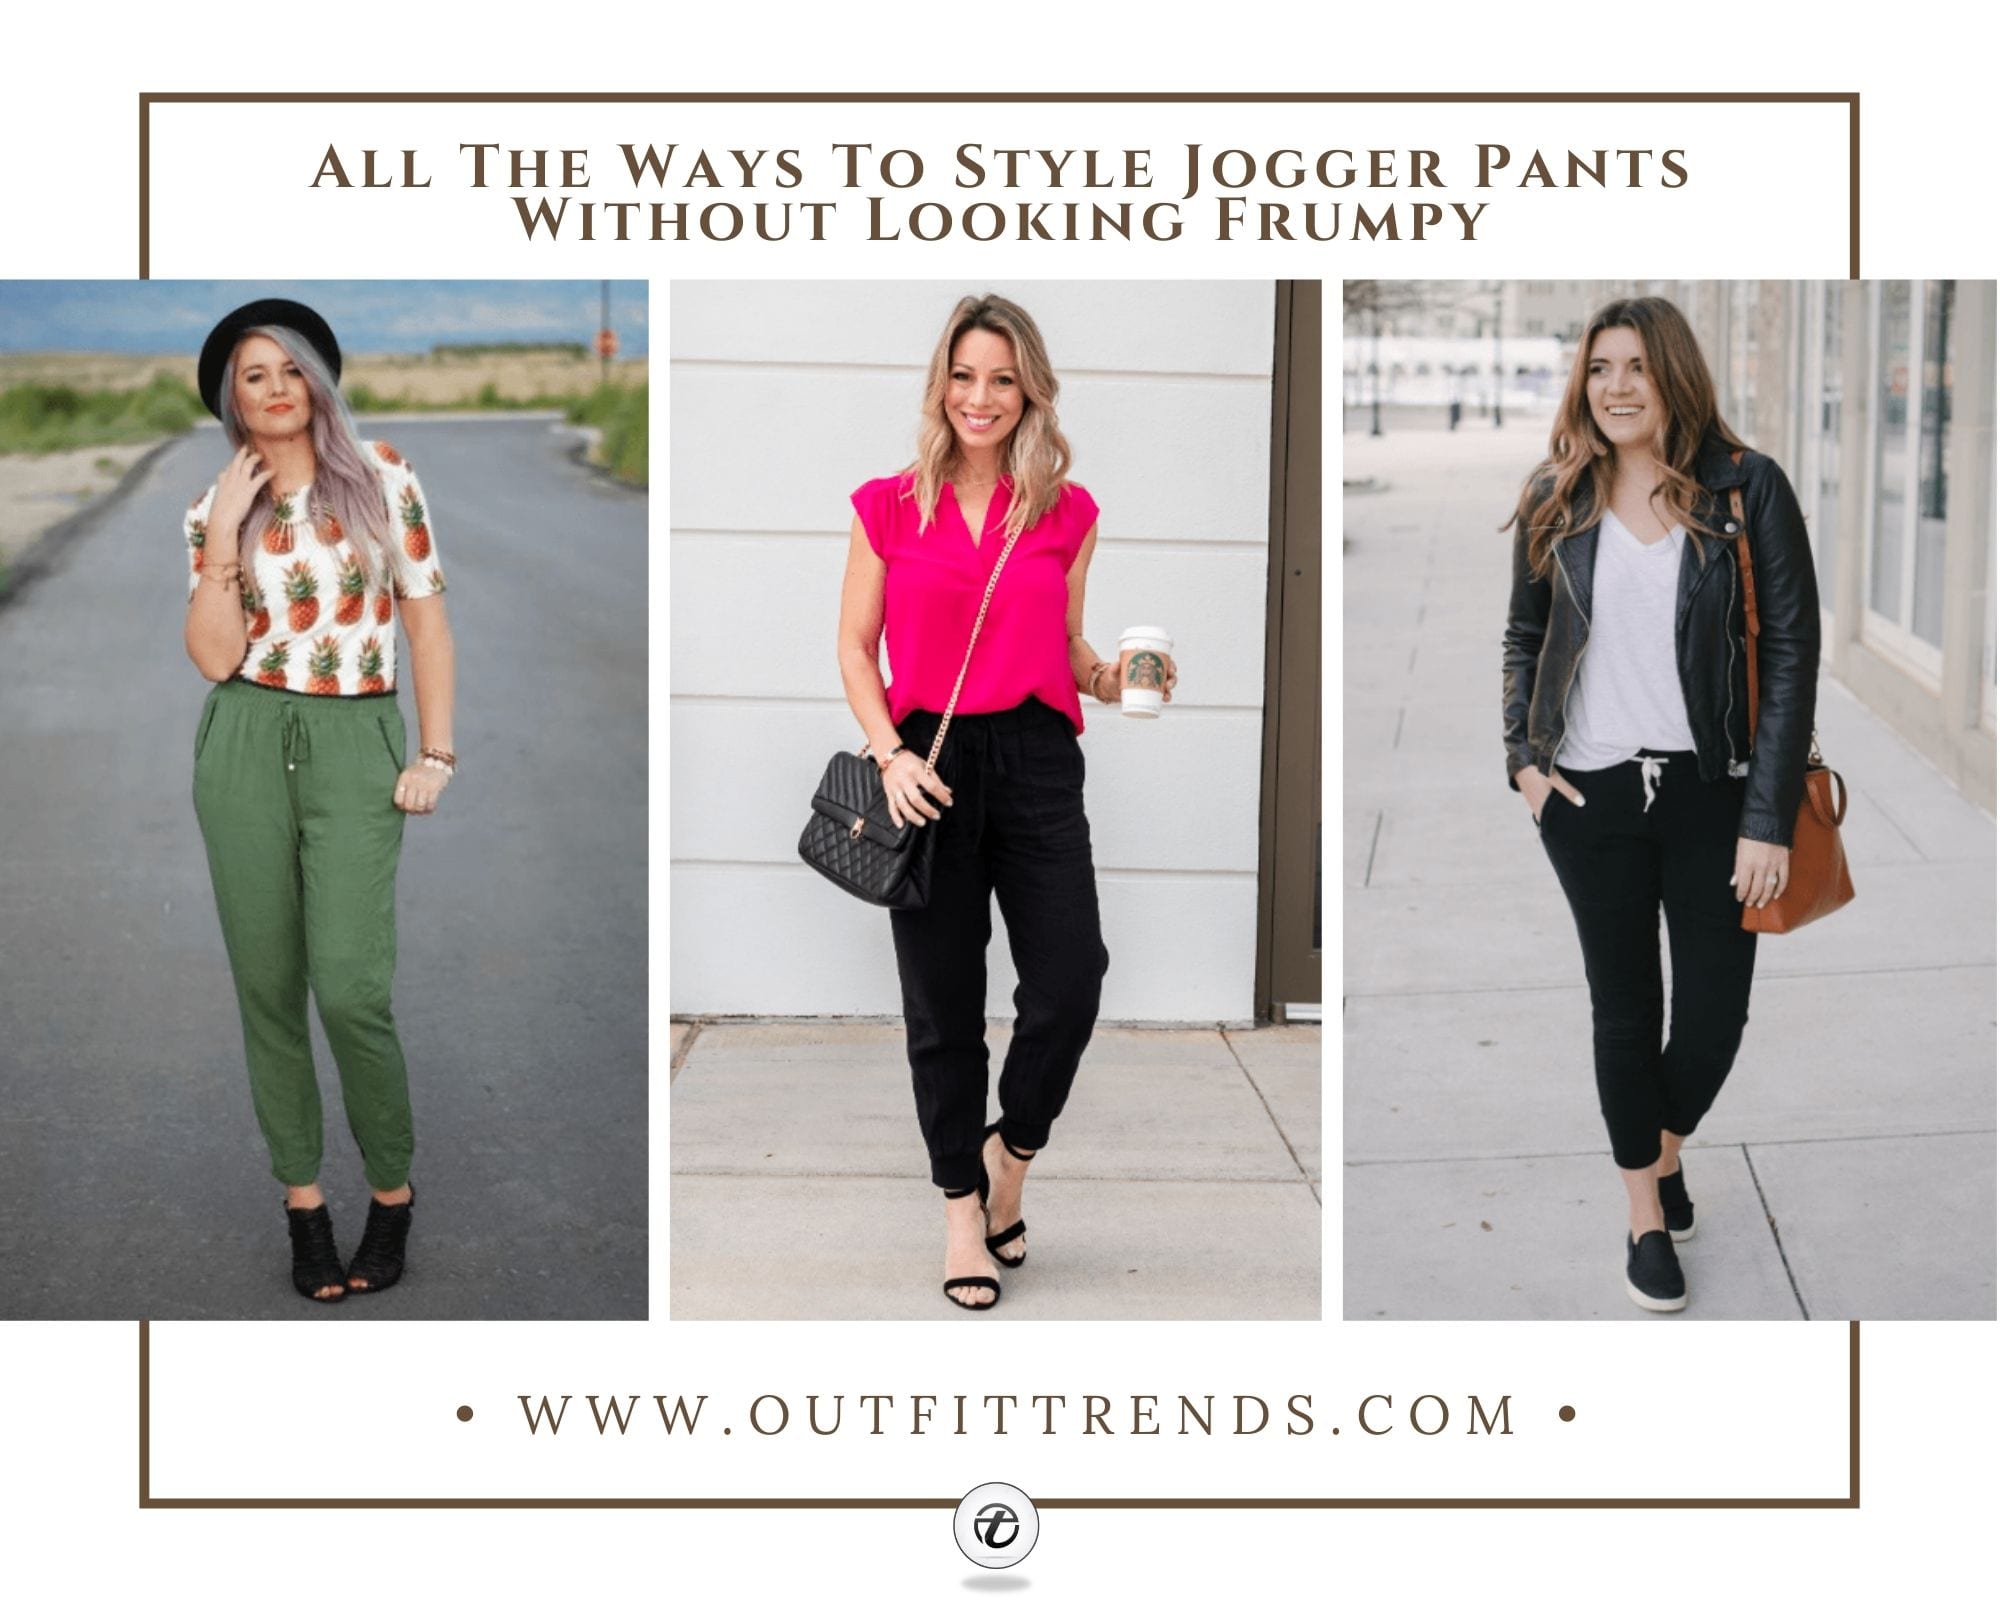 Joggers for Women Buy Jogger Pants for Women Online at Best Price  Jockey  India